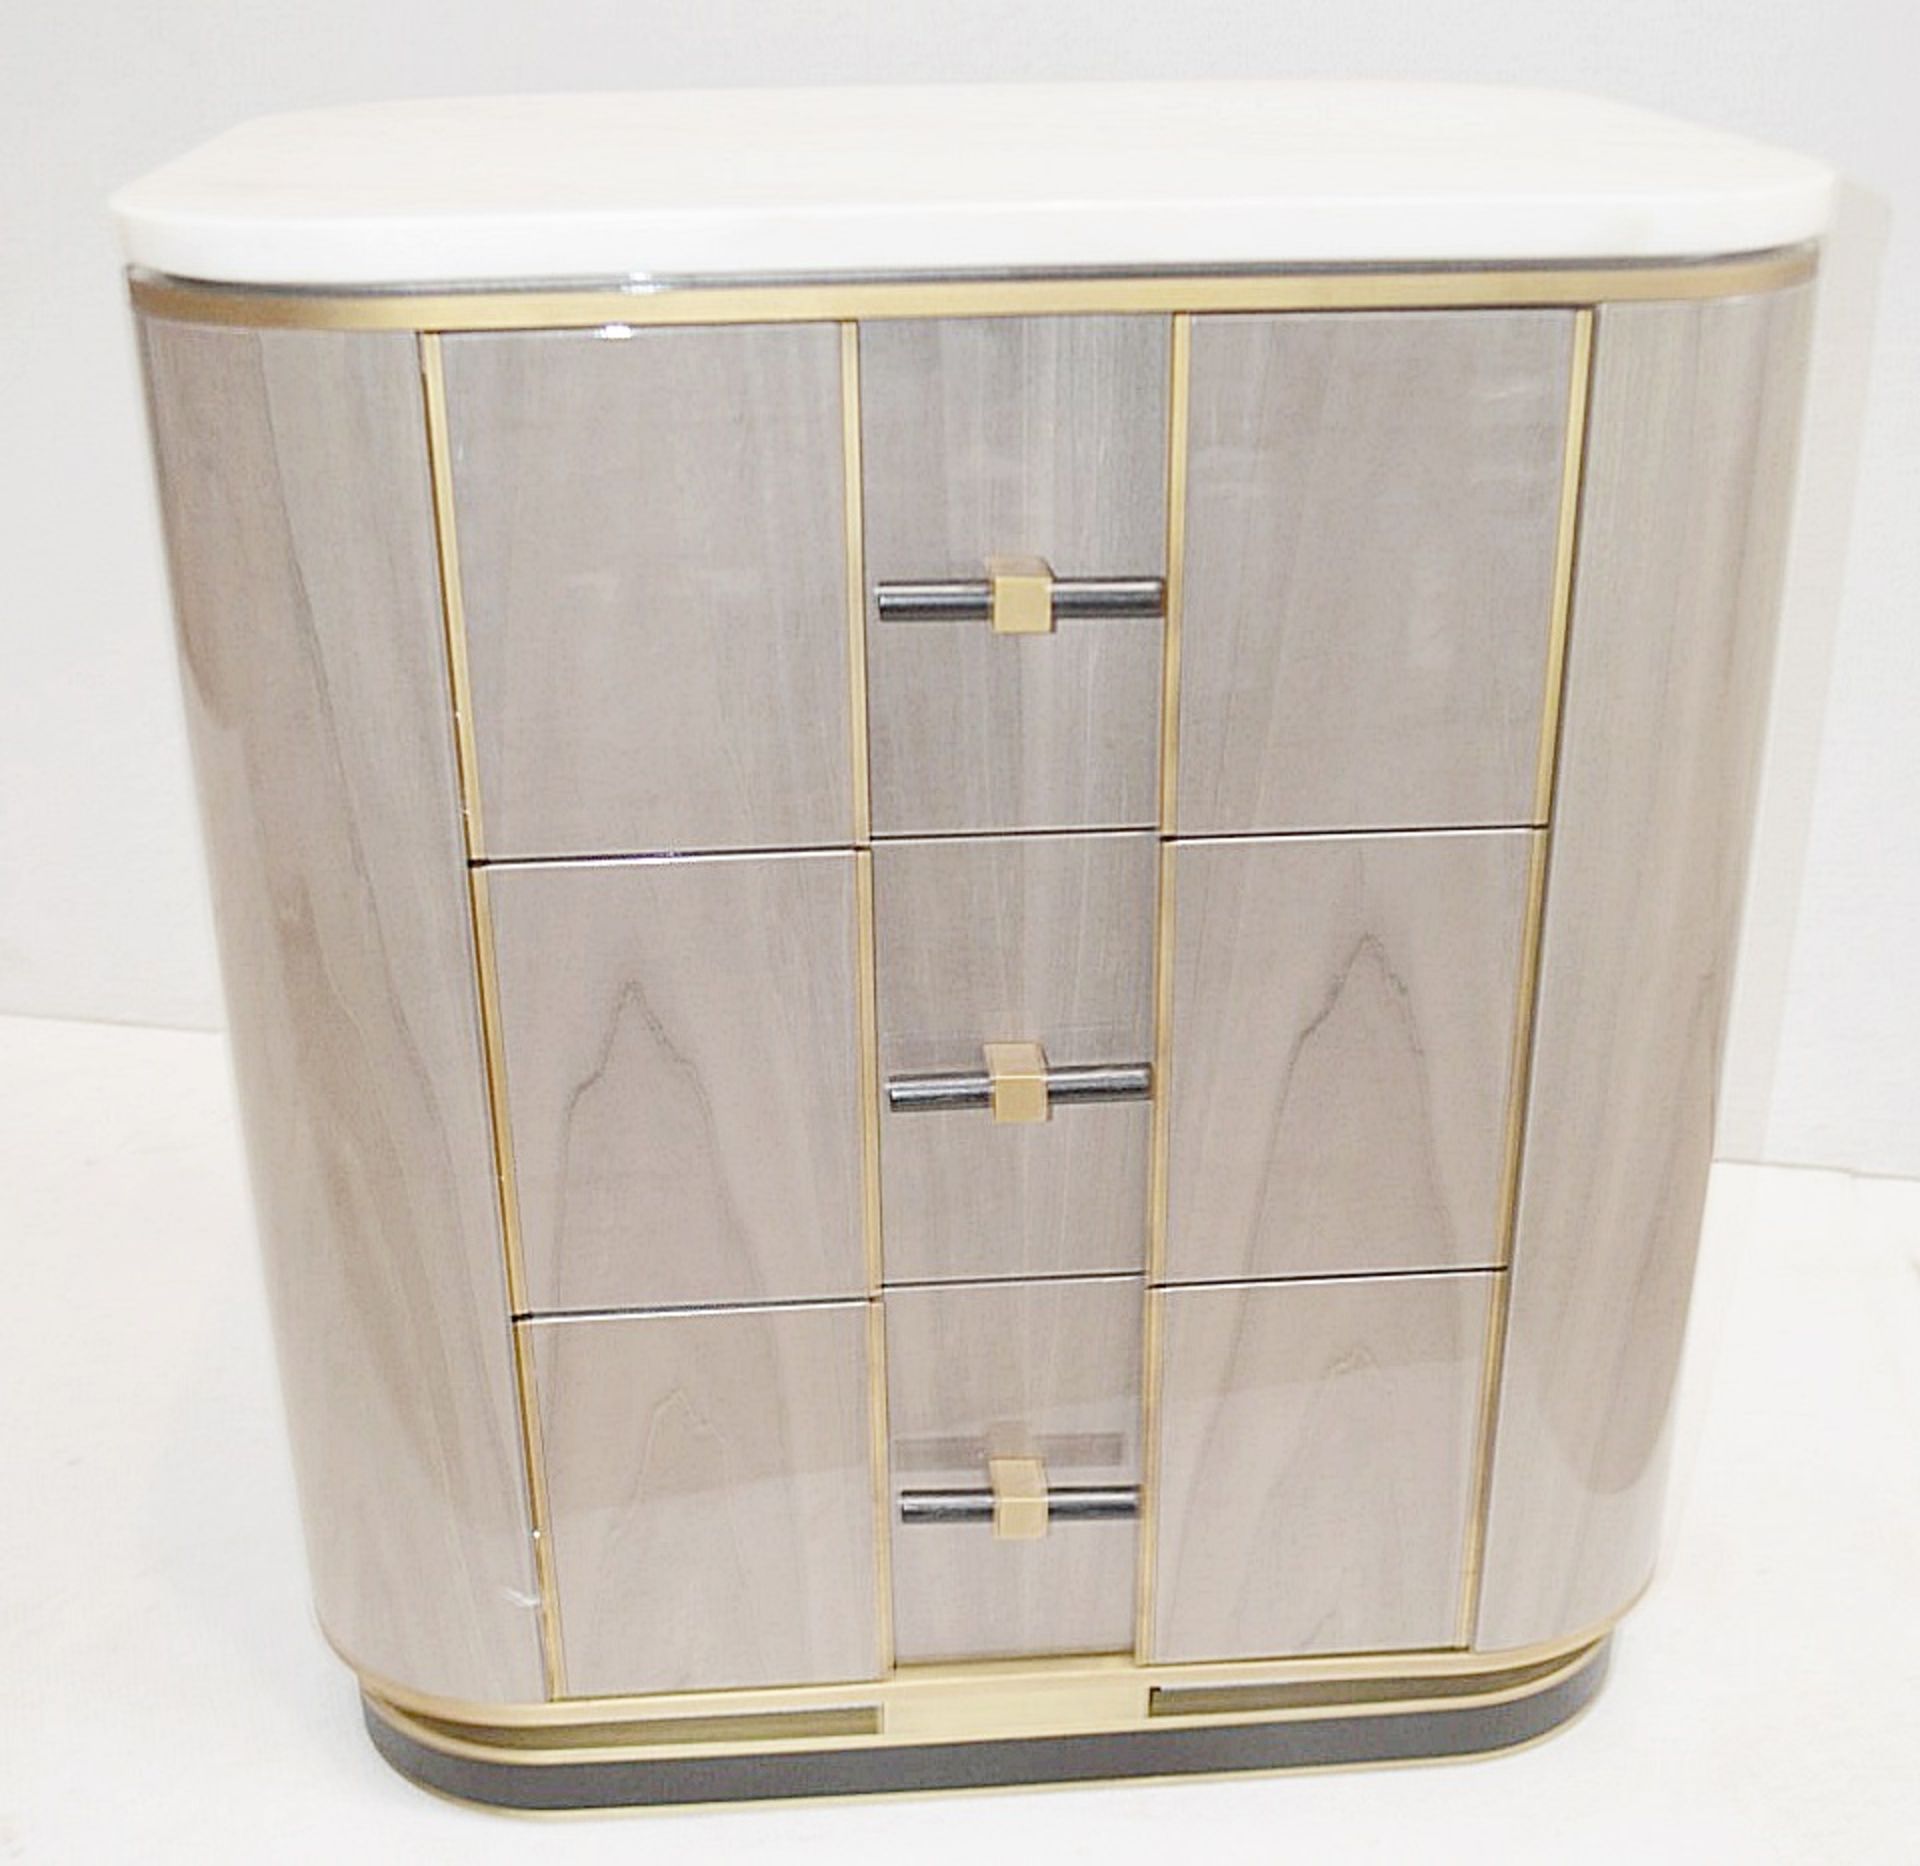 1 x FRATO 'ASHI' Luxury Custon Ordered Stone-topped Bedside Table - Original Price £5,140 - Image 2 of 9